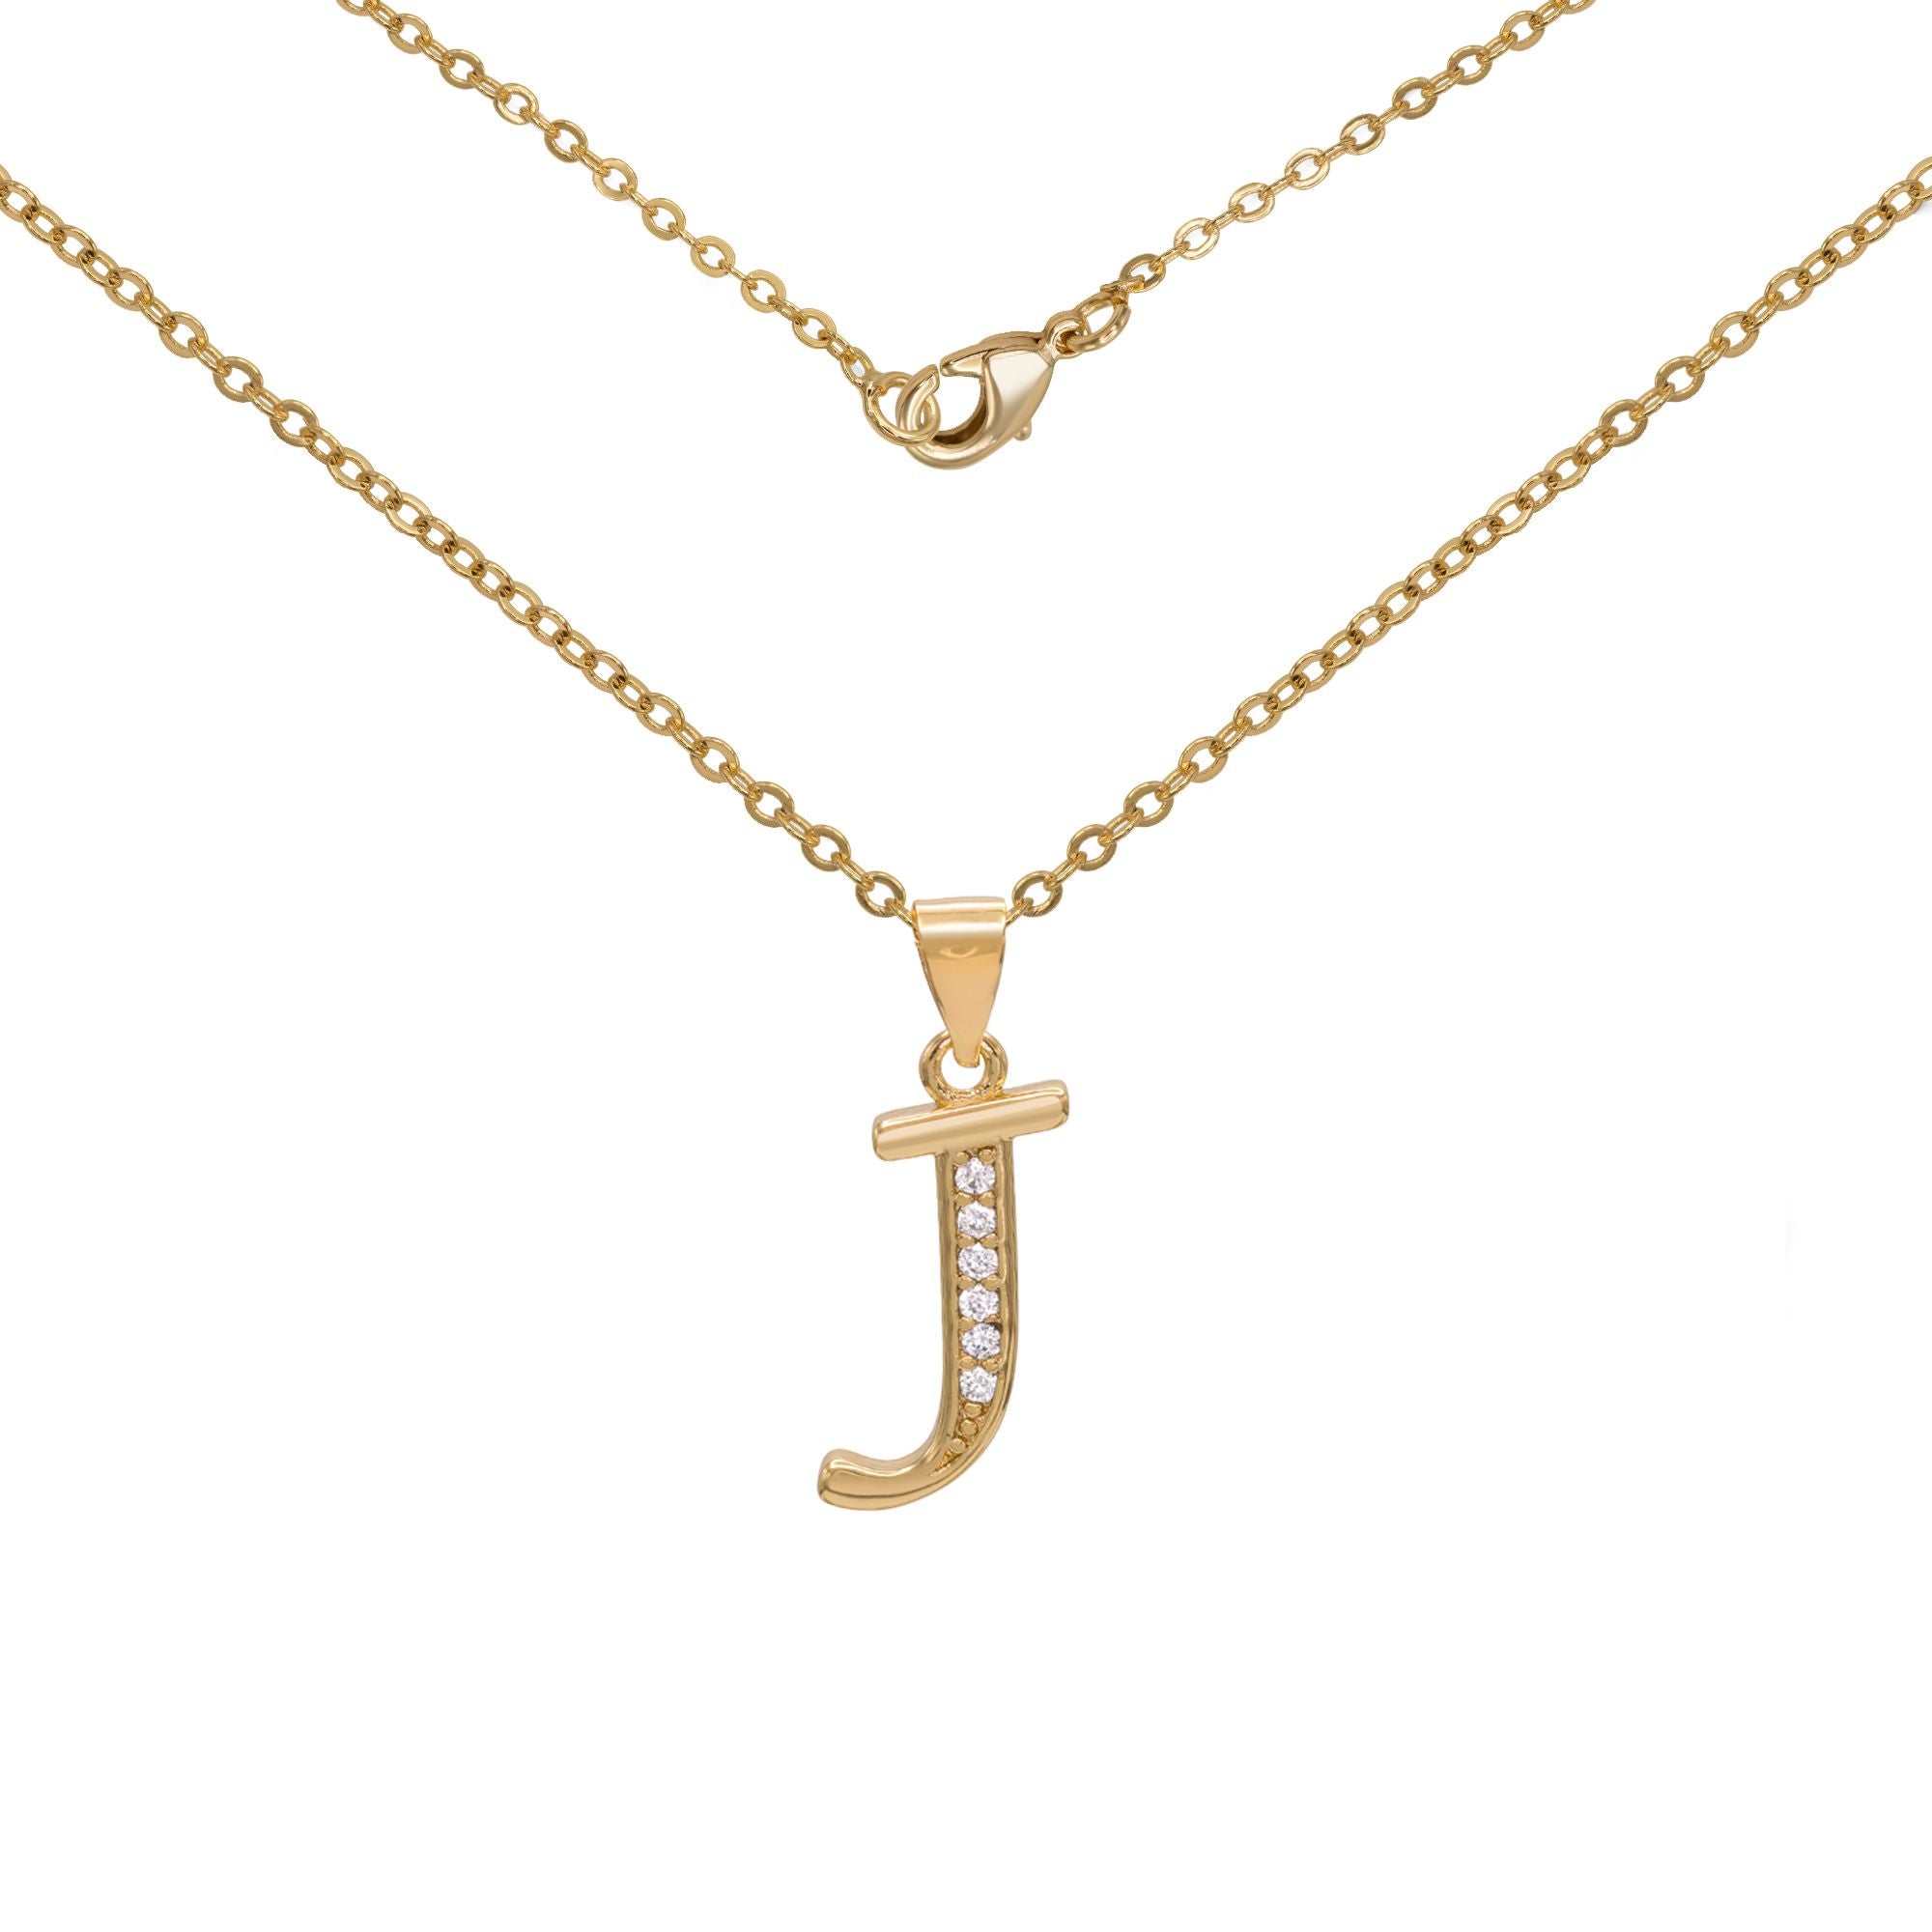 Initial Letter Pendant With Cubic Zirconia 18K Gold Filled Alphabet CZ Charm Rolo Chain Set 18" Necklace Women Girl Teen